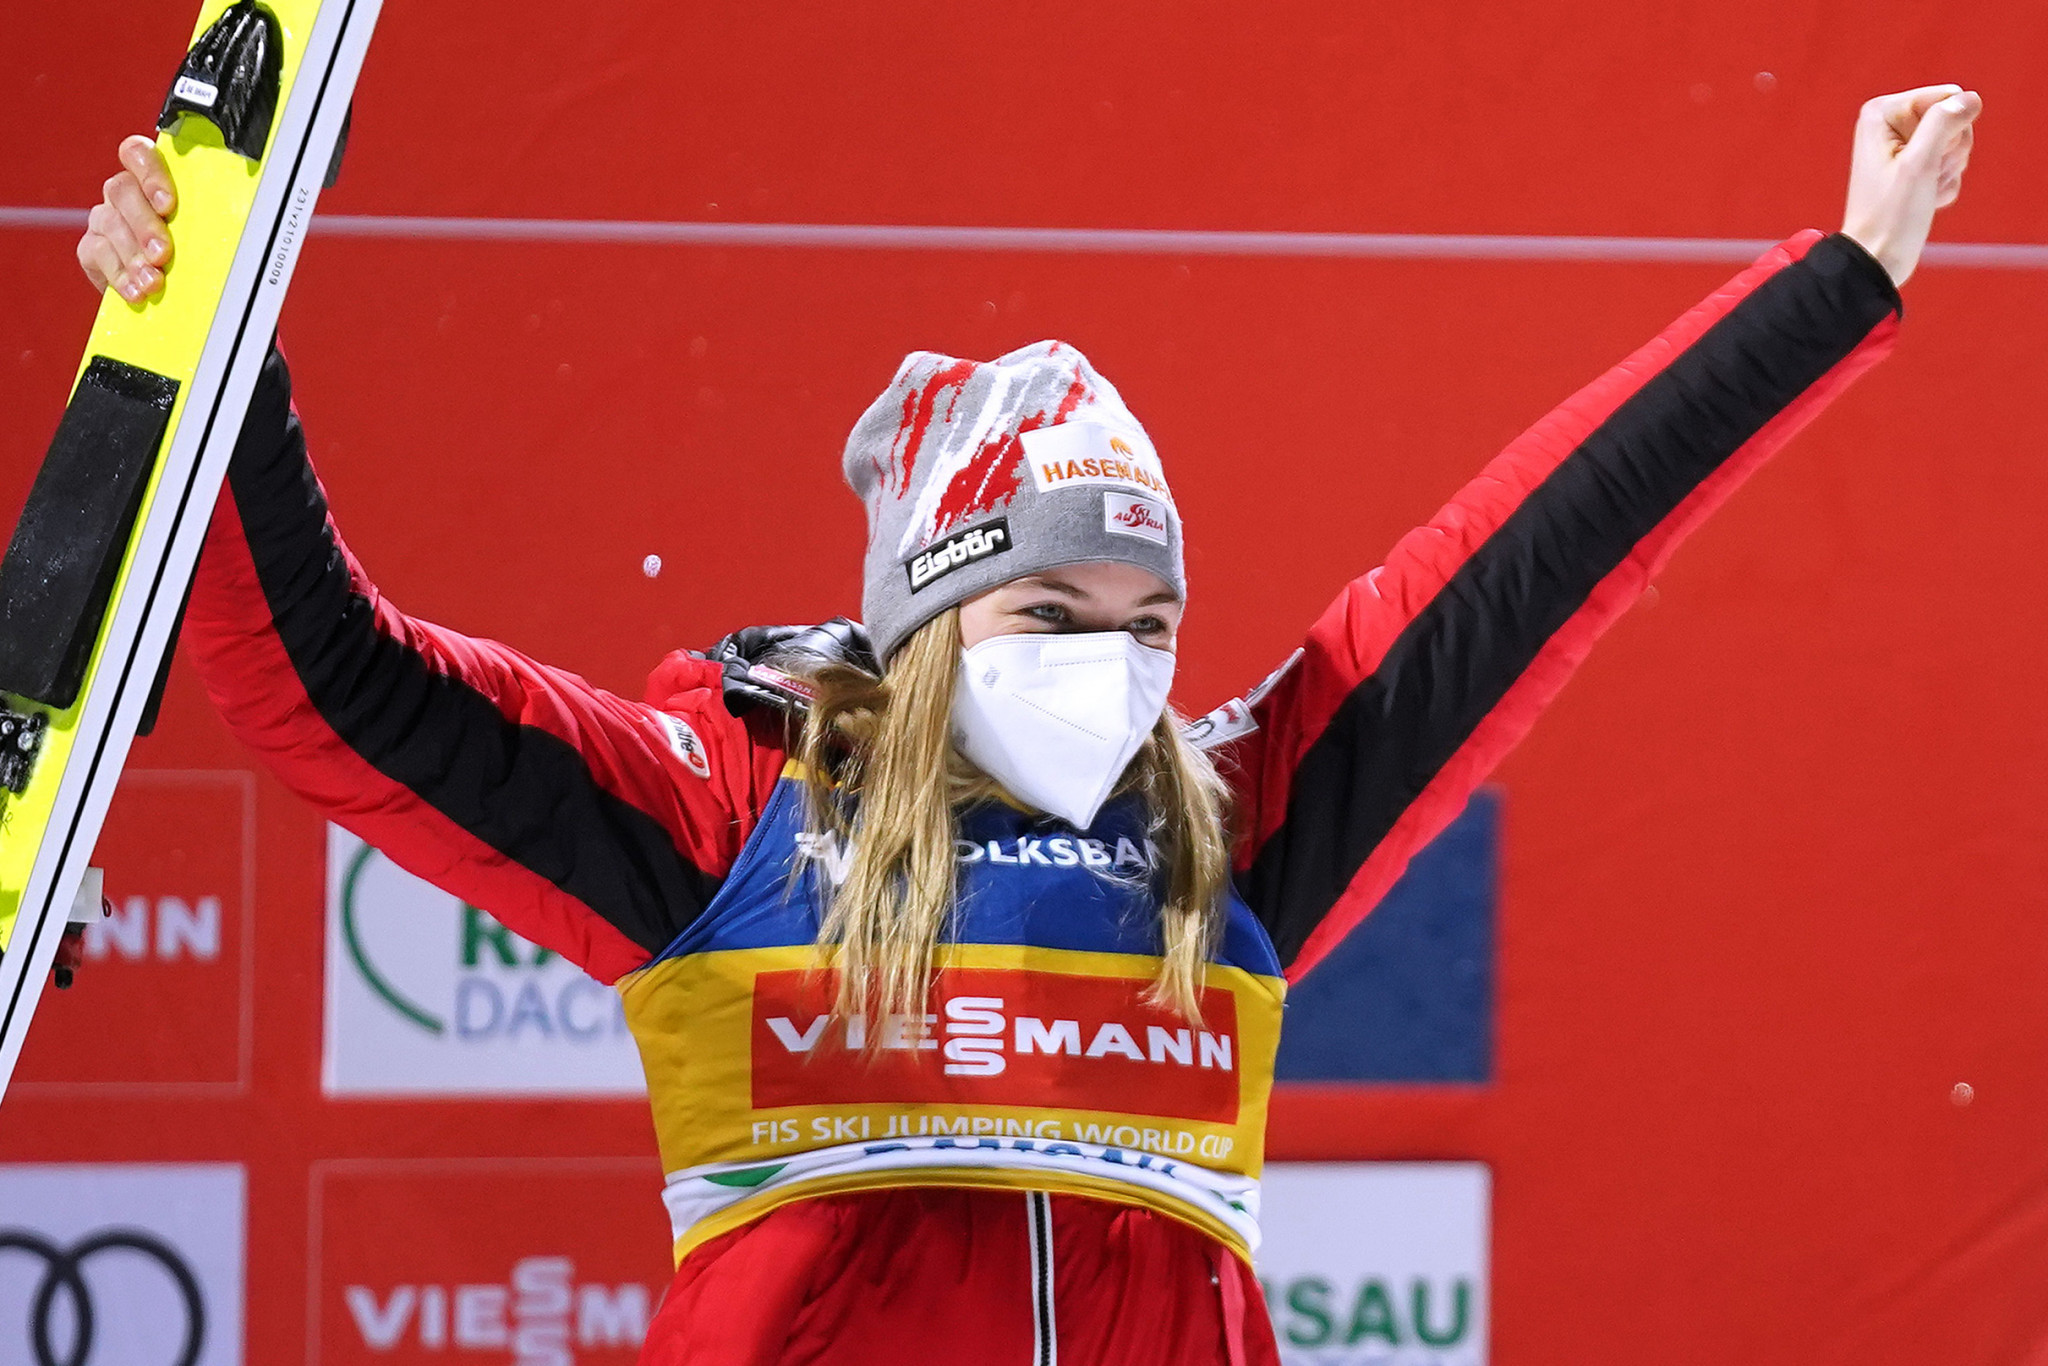 Marita Kramer of Austria was the winner at the season-opening FIS Ski Jumping World Cup event in Ramsau ©Getty Images